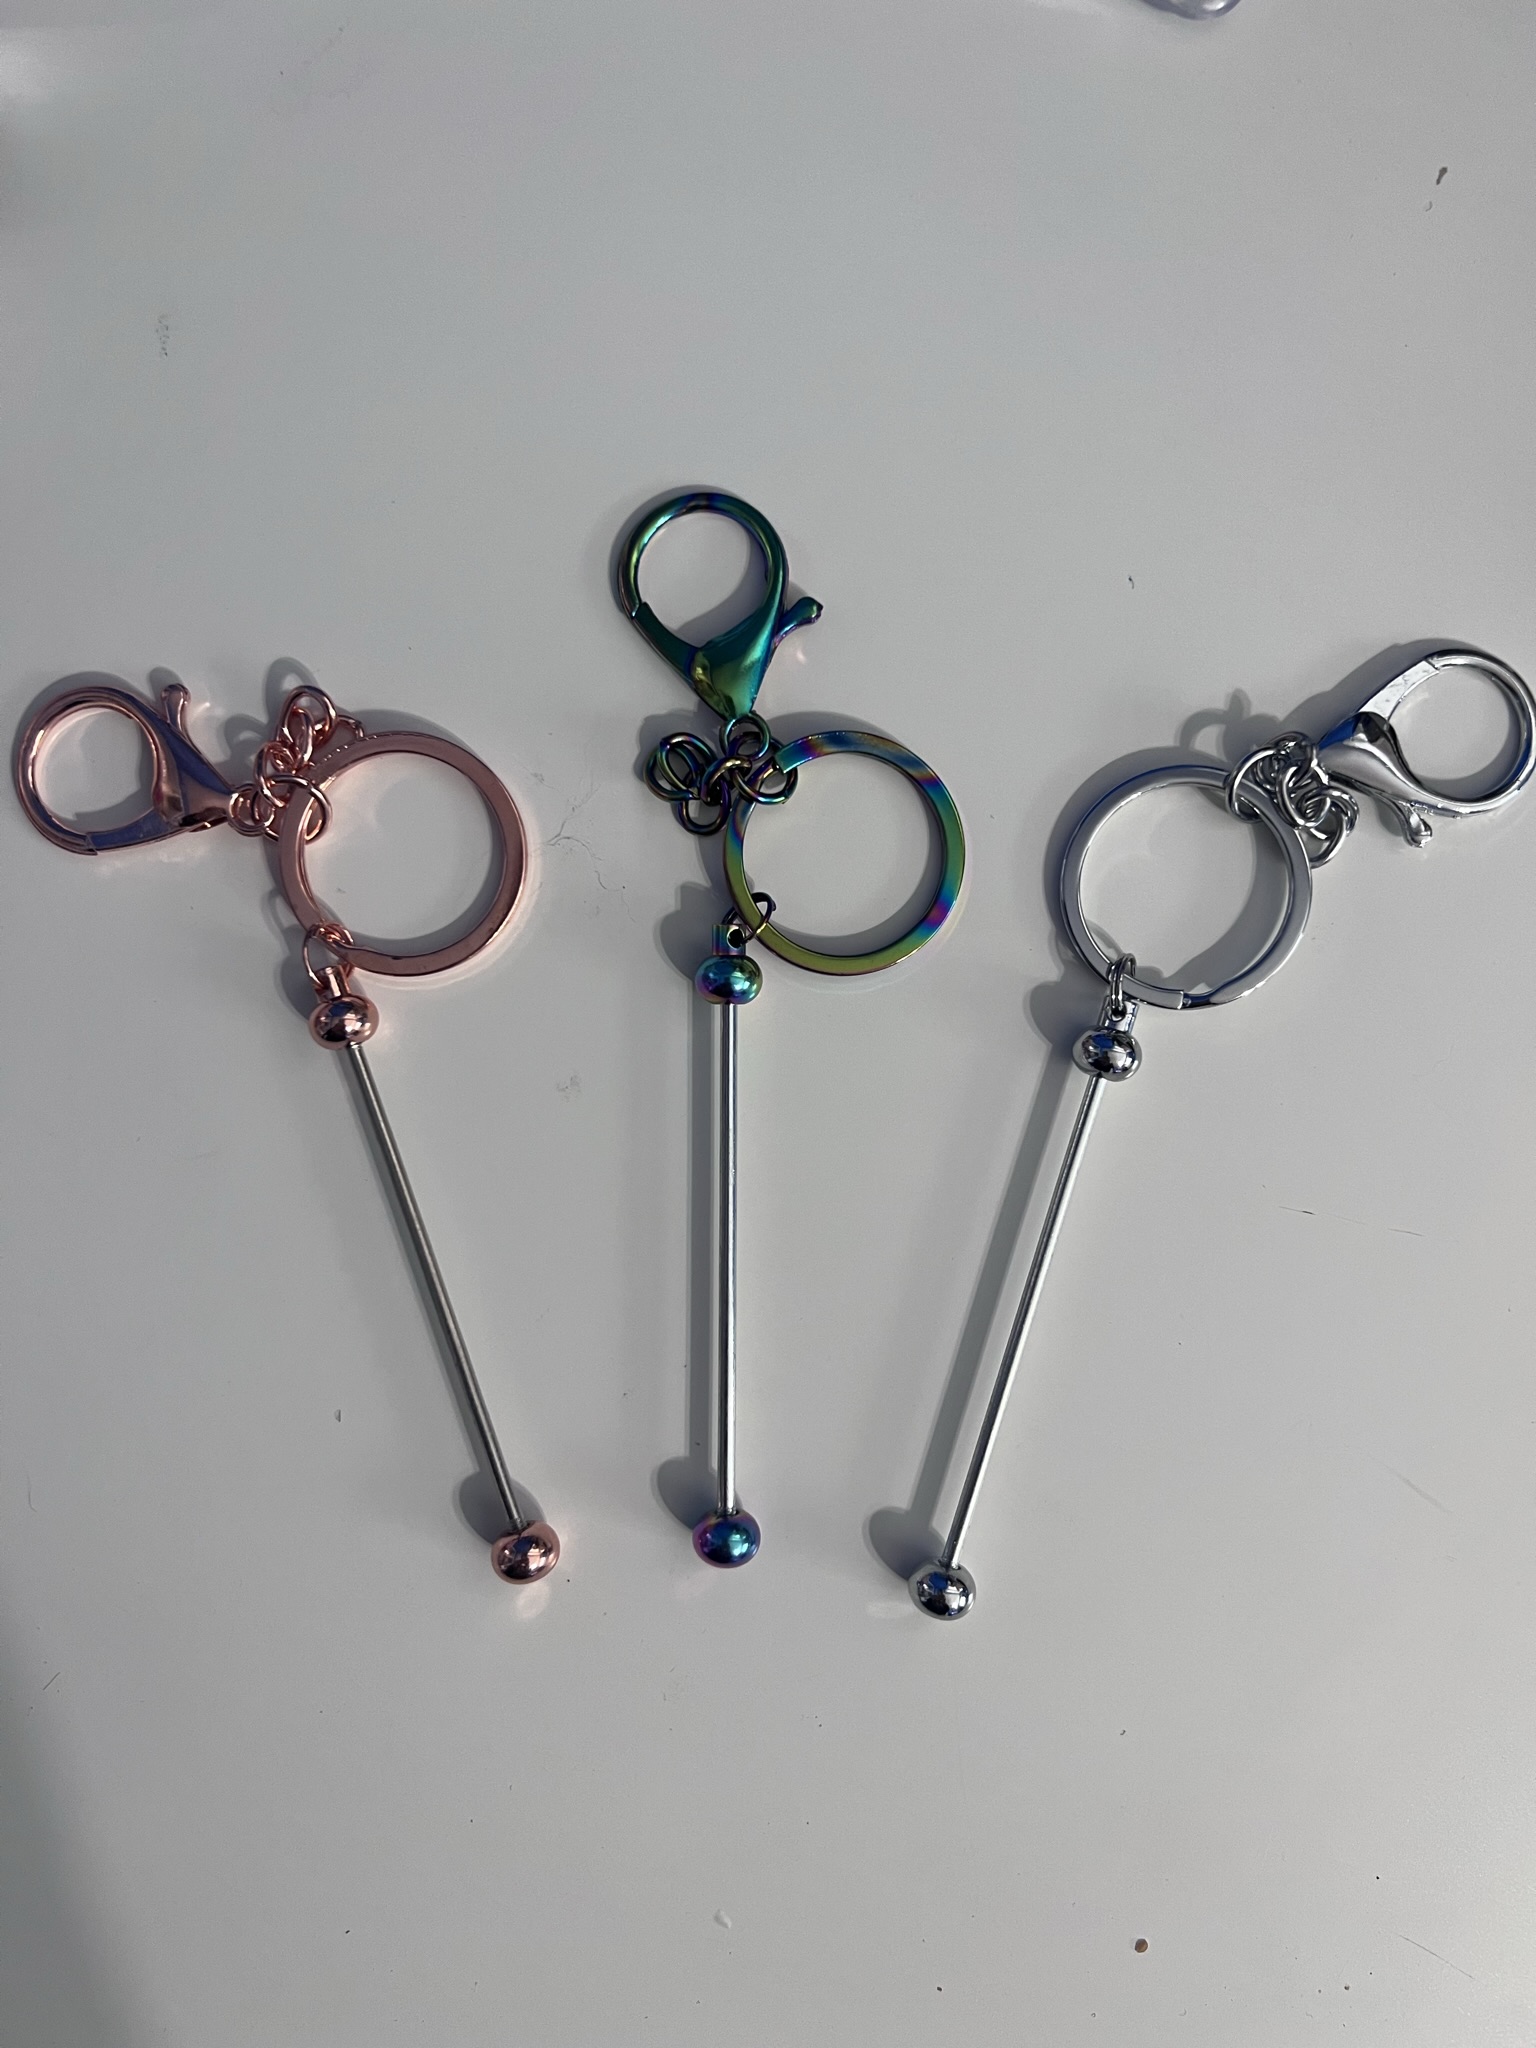 1 Dazzling Beadable keychains bars, beadable Blanks - Key Chain or Pendant  - Add beads - SillyMunk